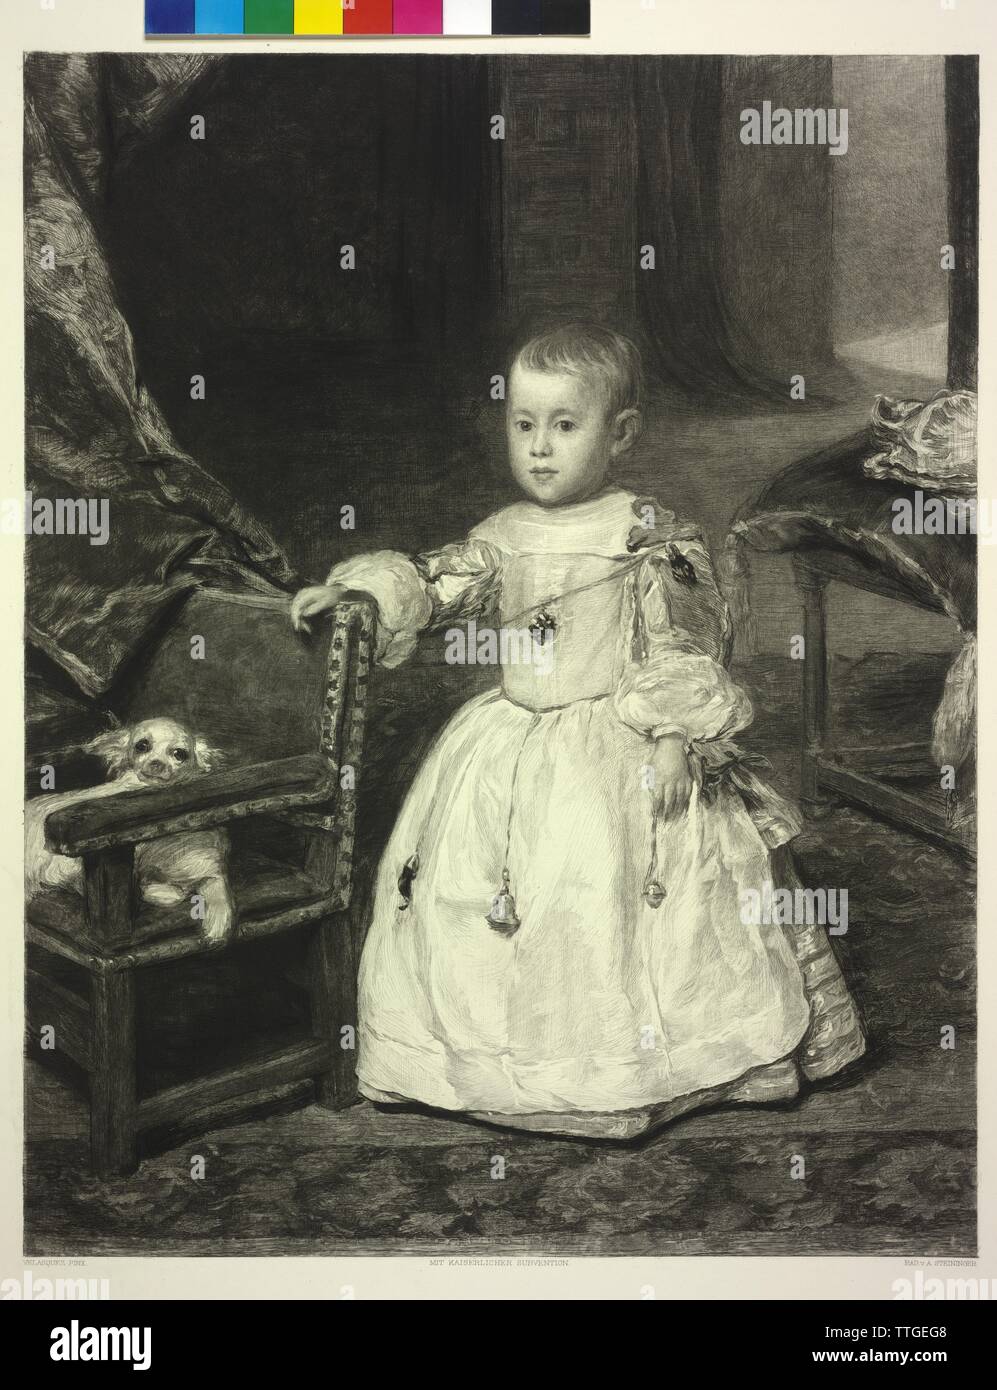 Philipp Prosper, Infante of Spain, children image. etching by August Steininger based on a painting by Diego Velazquez, Additional-Rights-Clearance-Info-Not-Available Stock Photo